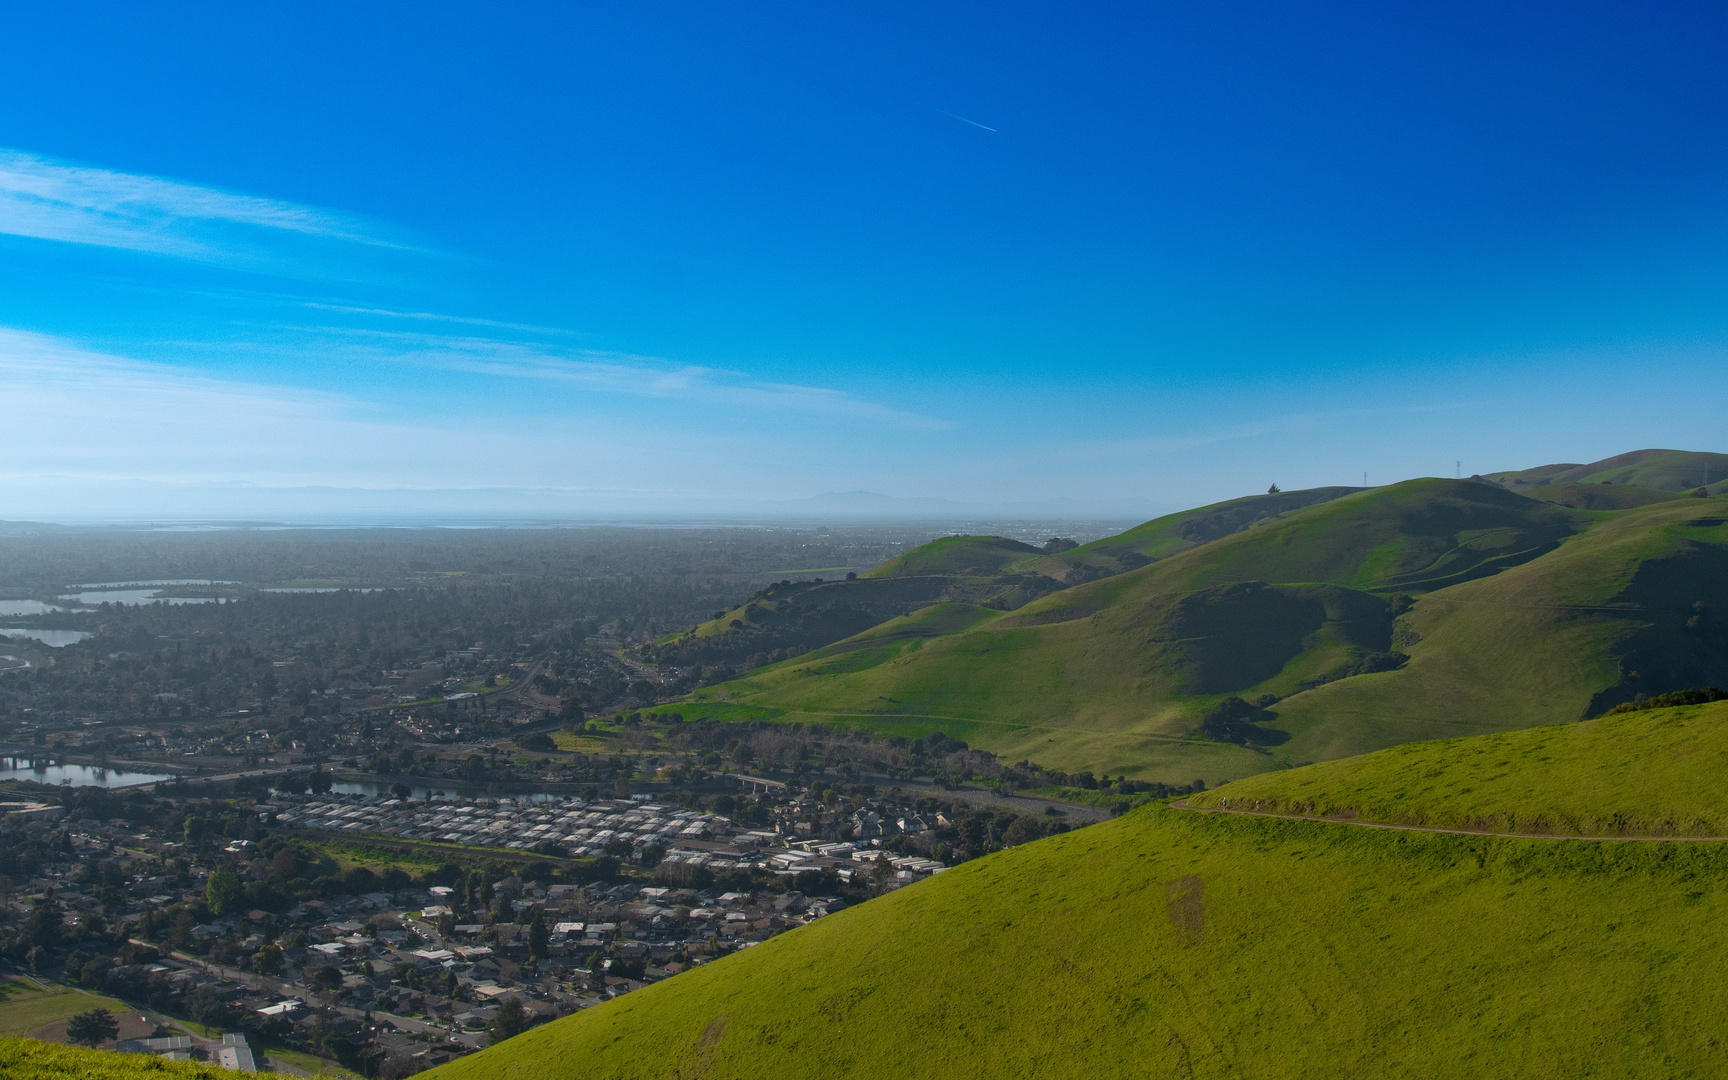 vargas plateau in fremont_getty